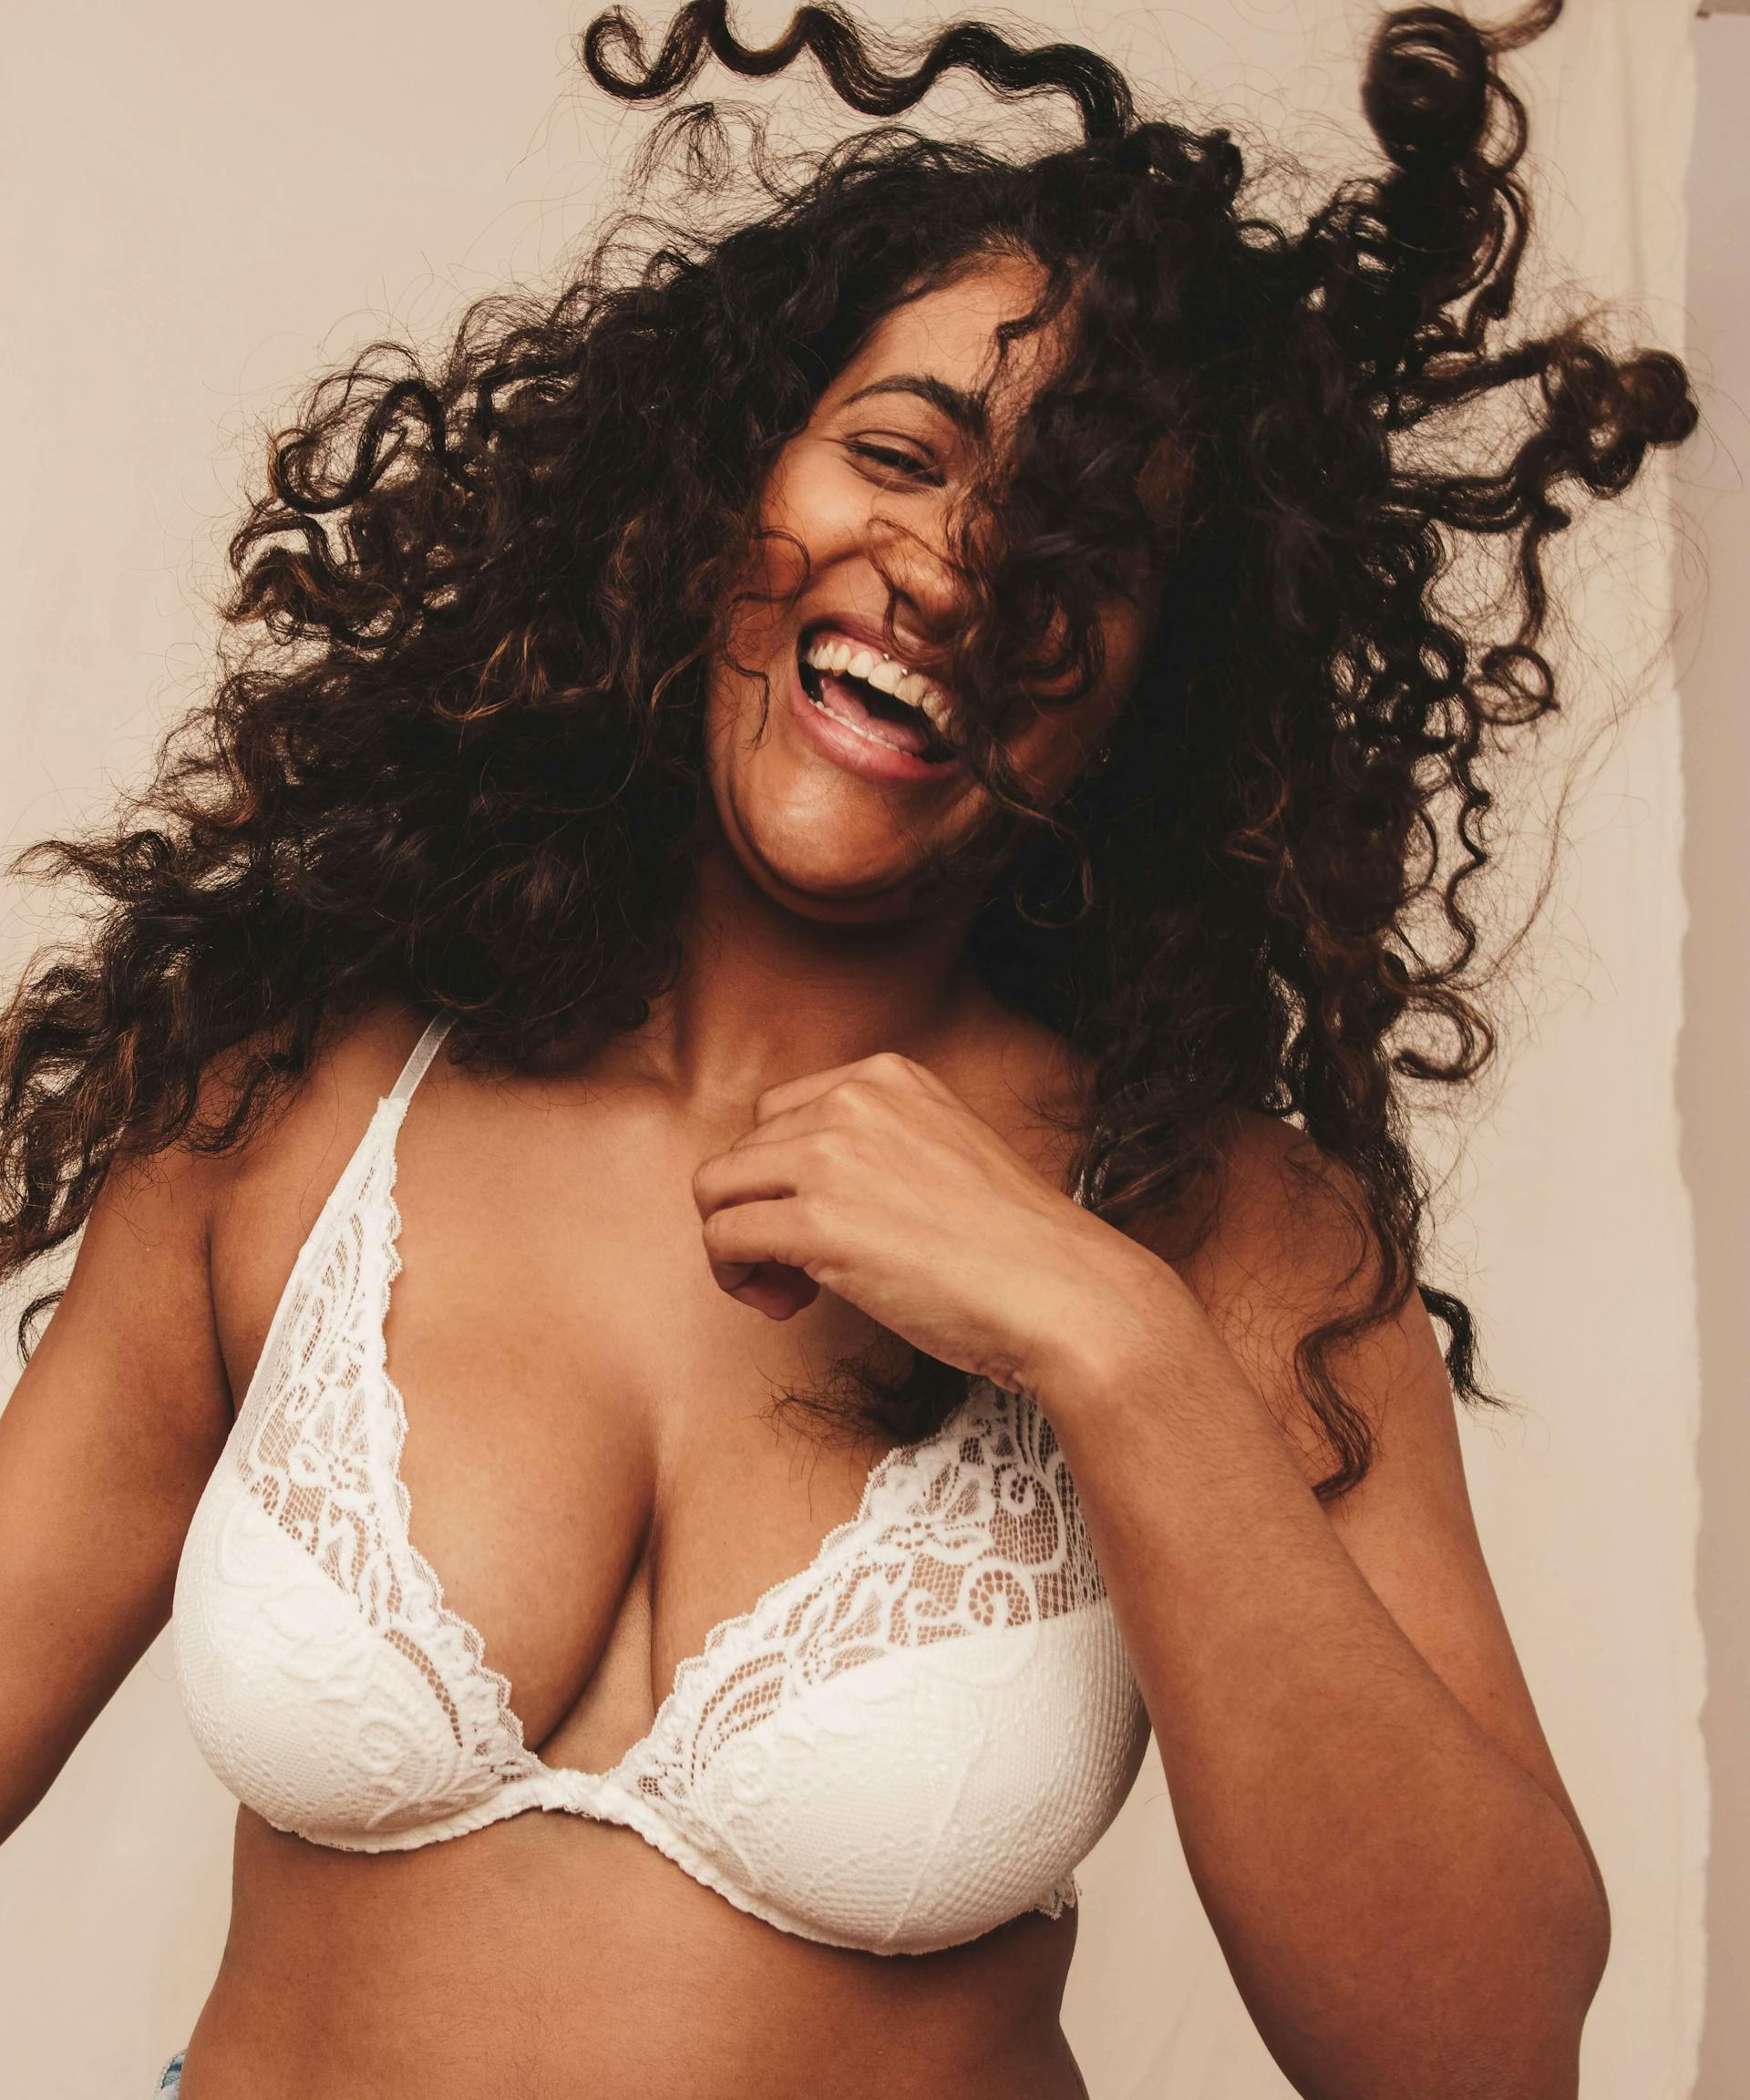 Our Curvy T-shirt bras are thoughtfully made in inclusive sizes of 32DD -  44F, making it the perfect every day wear bra. It provides fine…